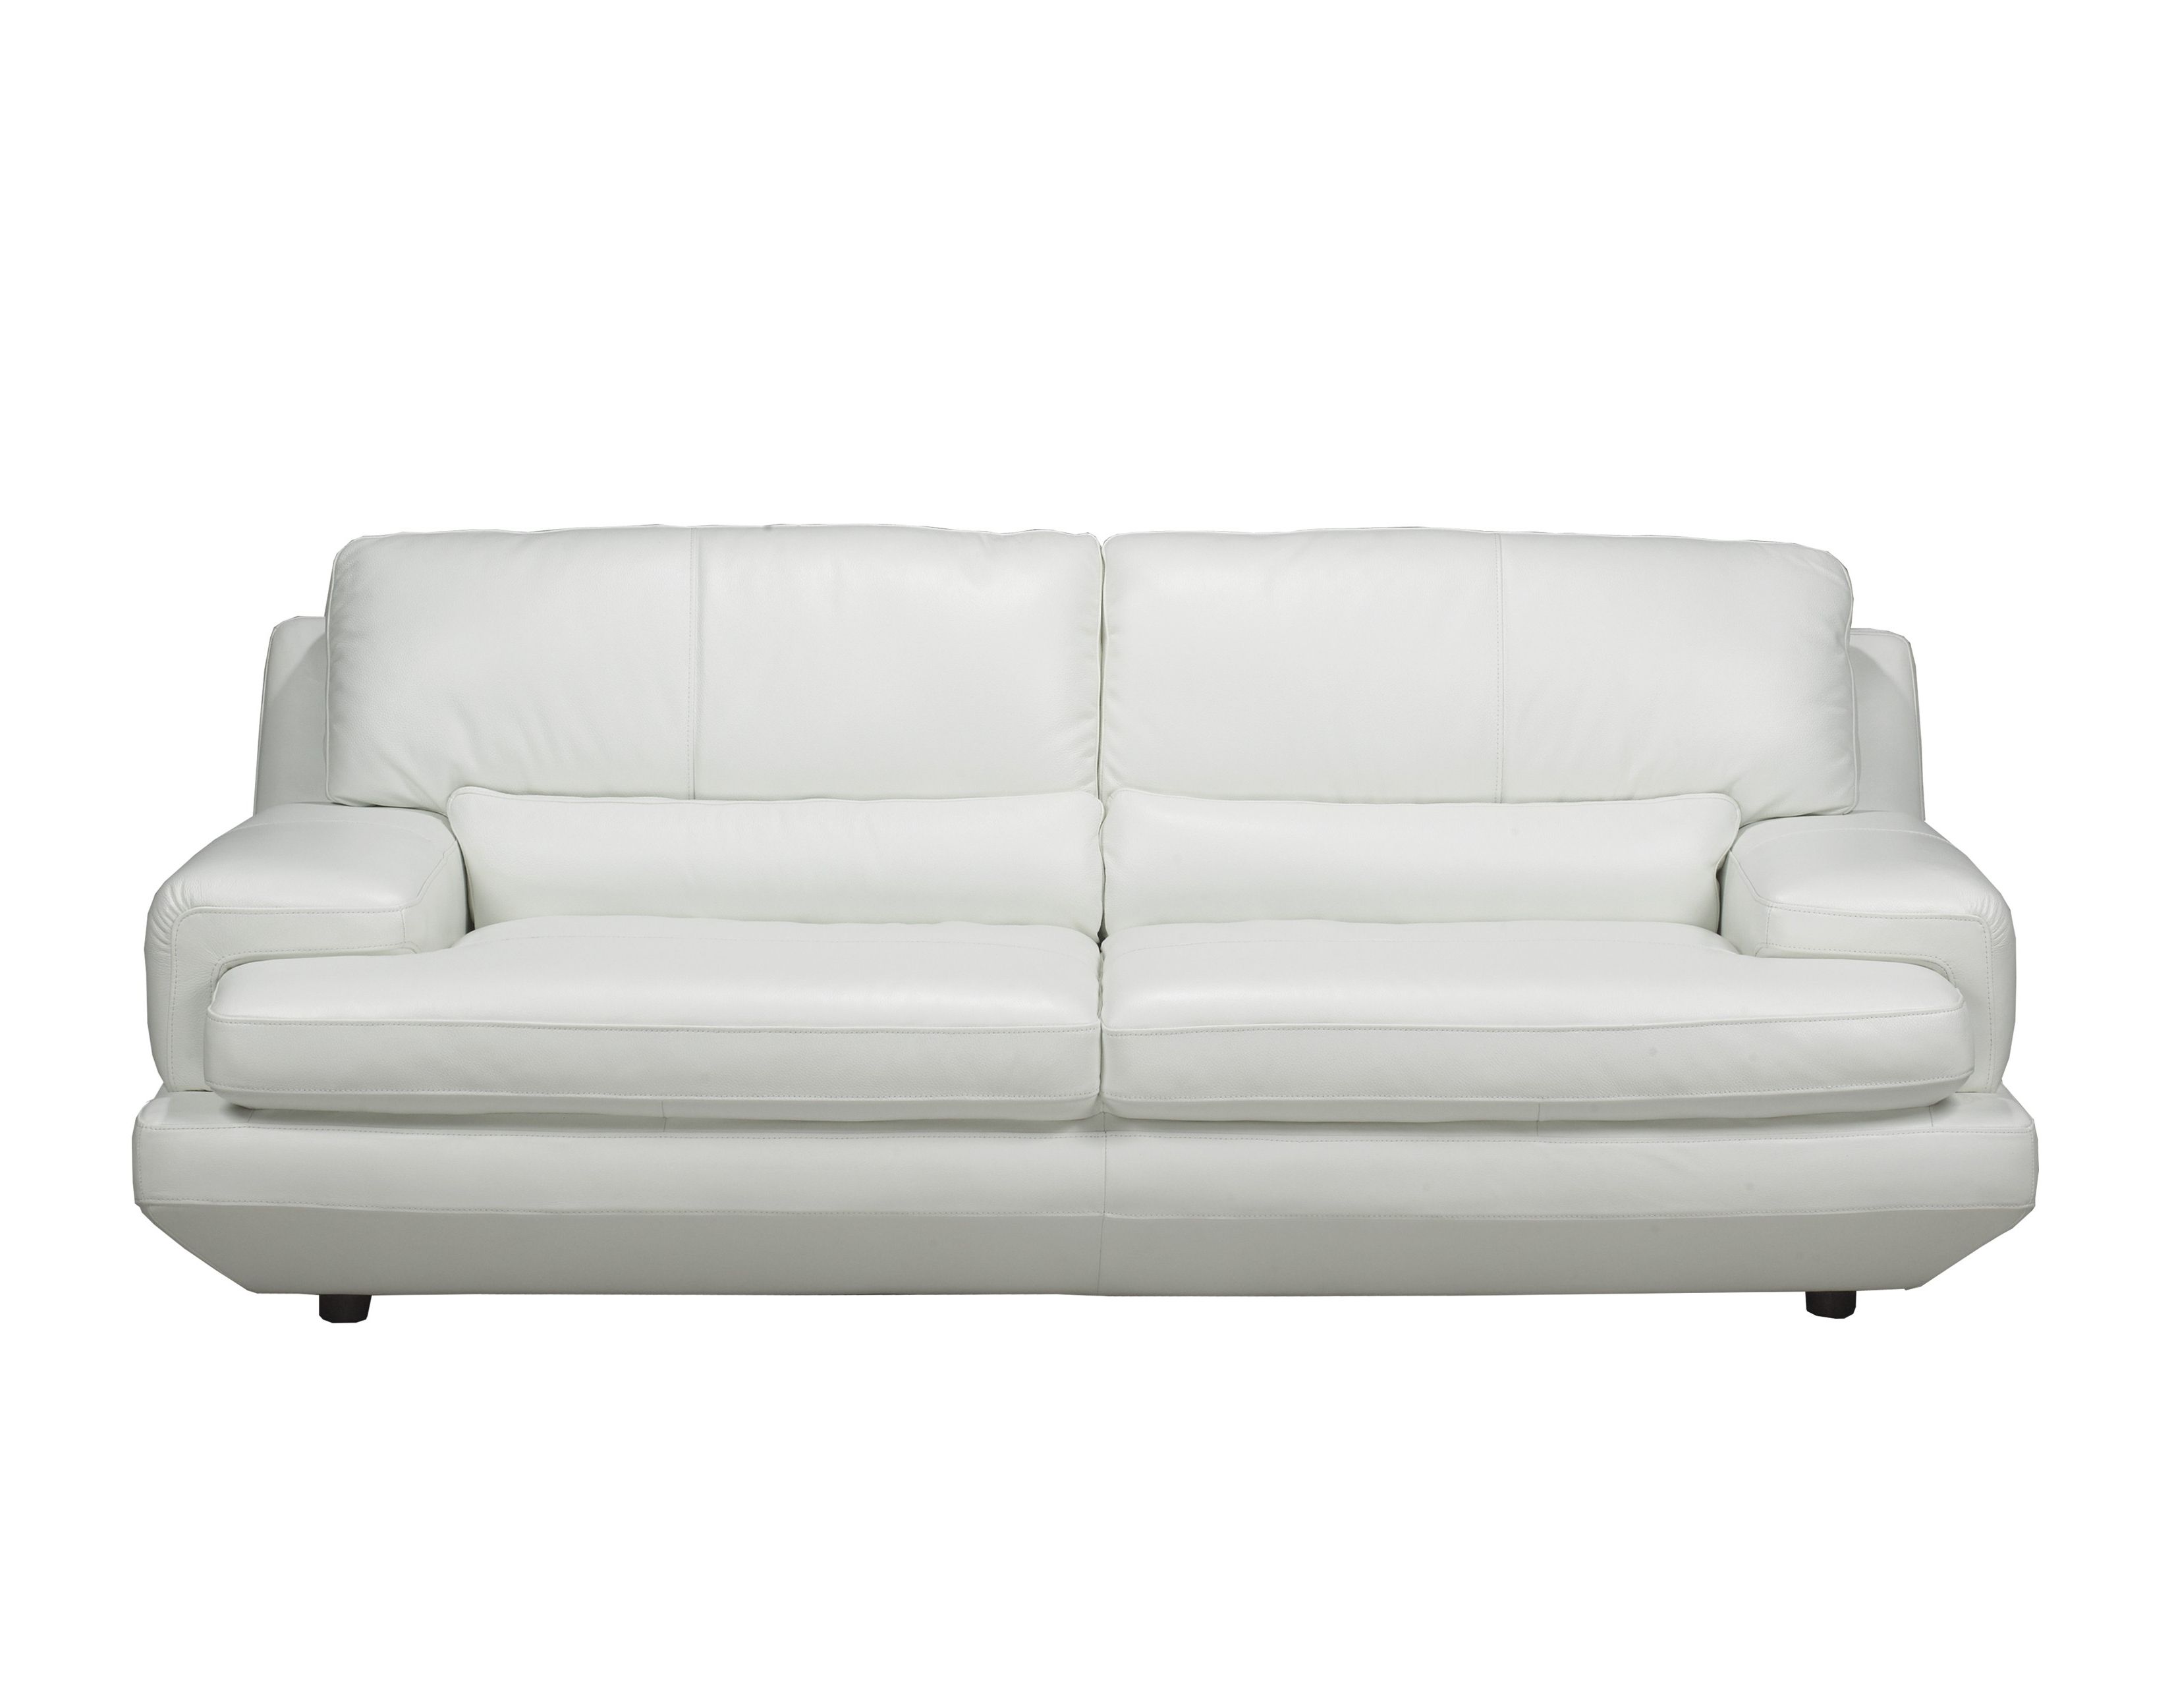 Decorating Black And White Leather Couch Pure Leather Sofa Set Throughout Favorite White Leather Sofas (View 7 of 20)